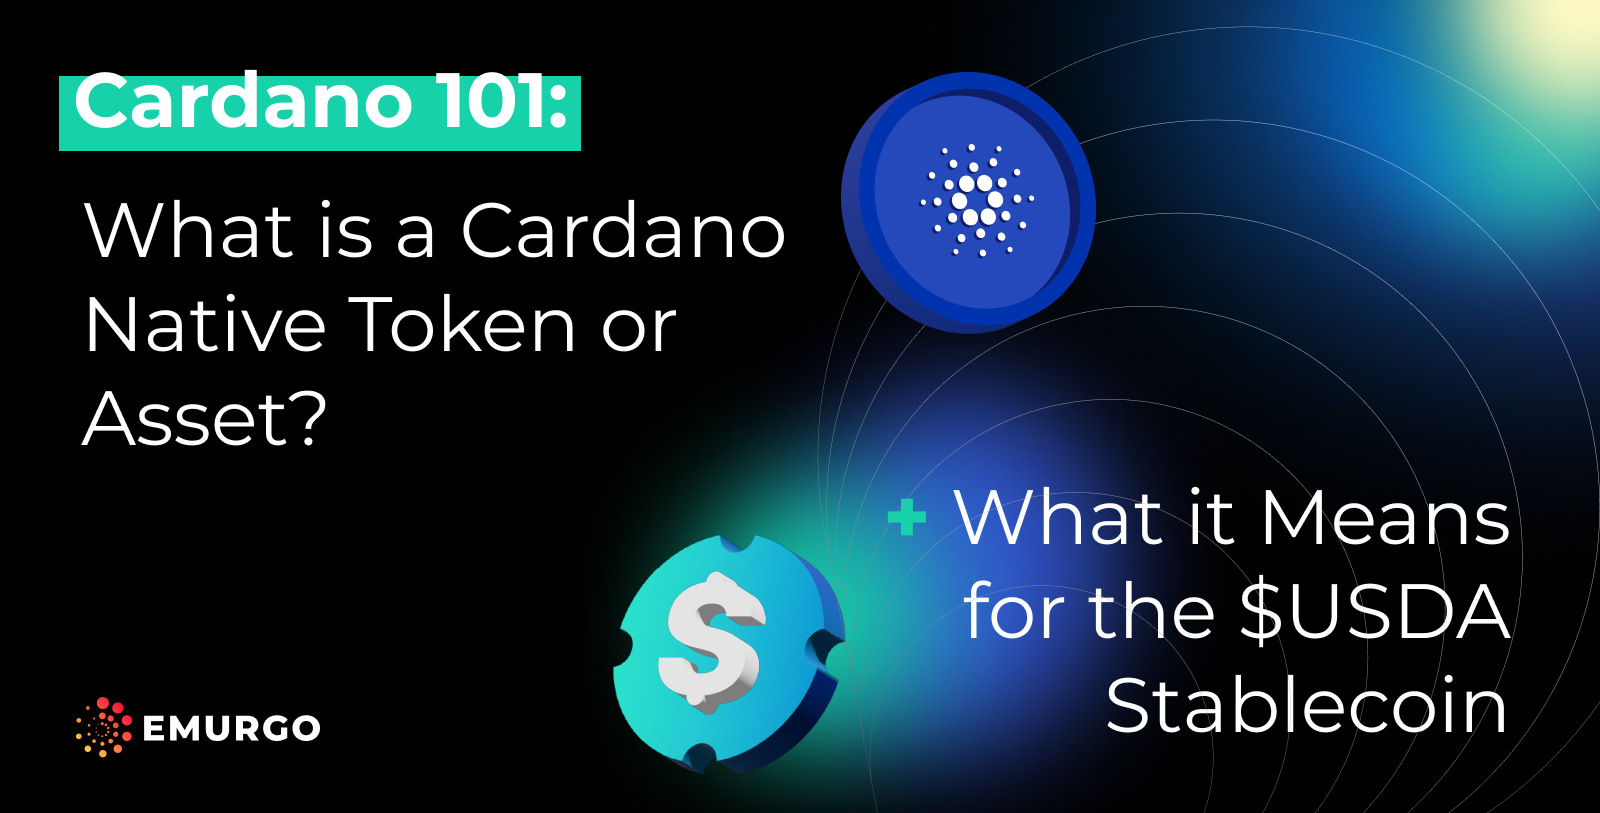 Cardano 101: What is a Cardano native token or asset? + What it means for the $USDA stablecoin